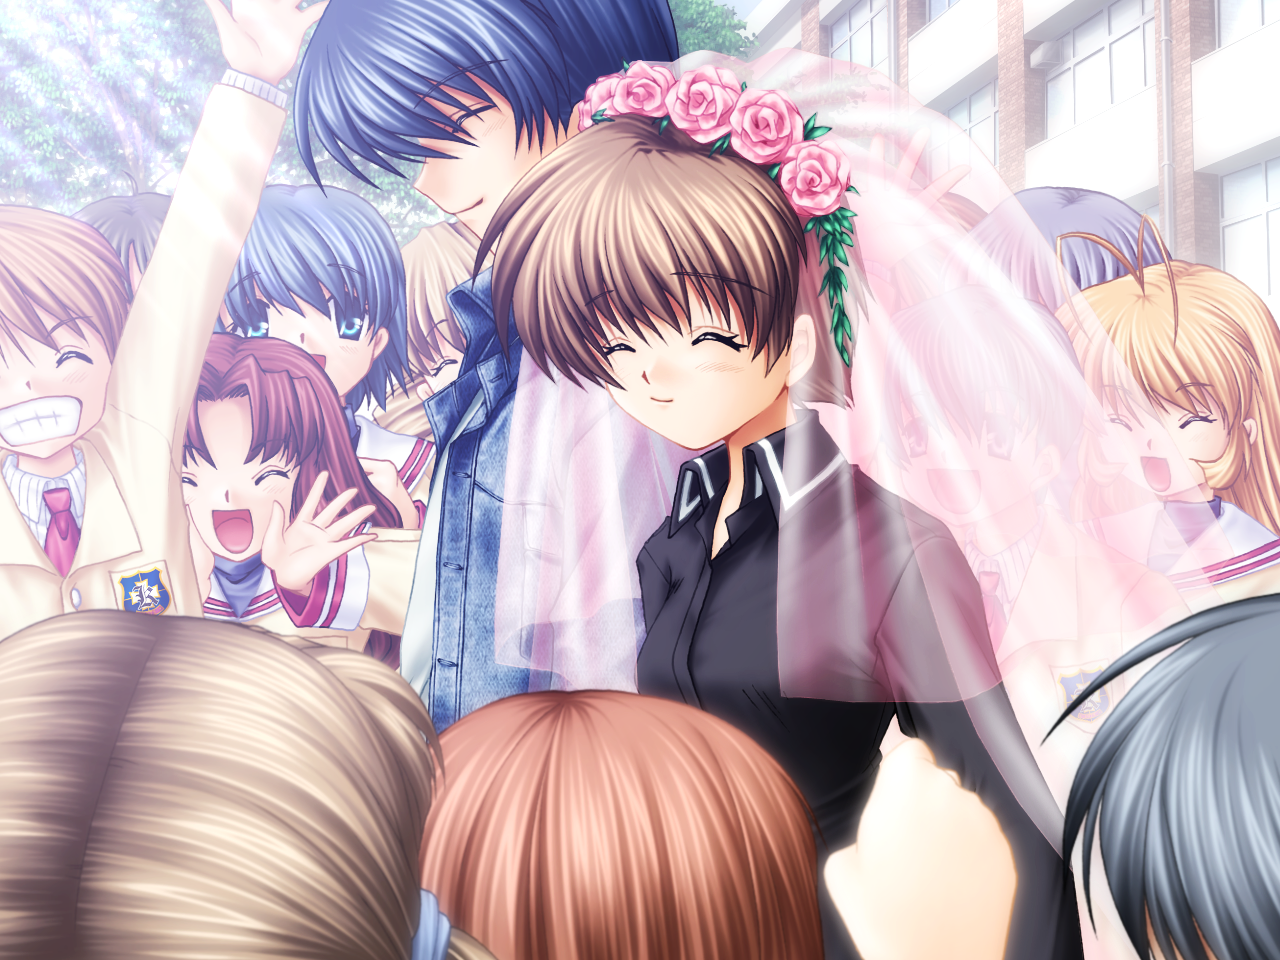 The Sunohara Siblings Ending (Sunohara Route Part 77) - Clannad